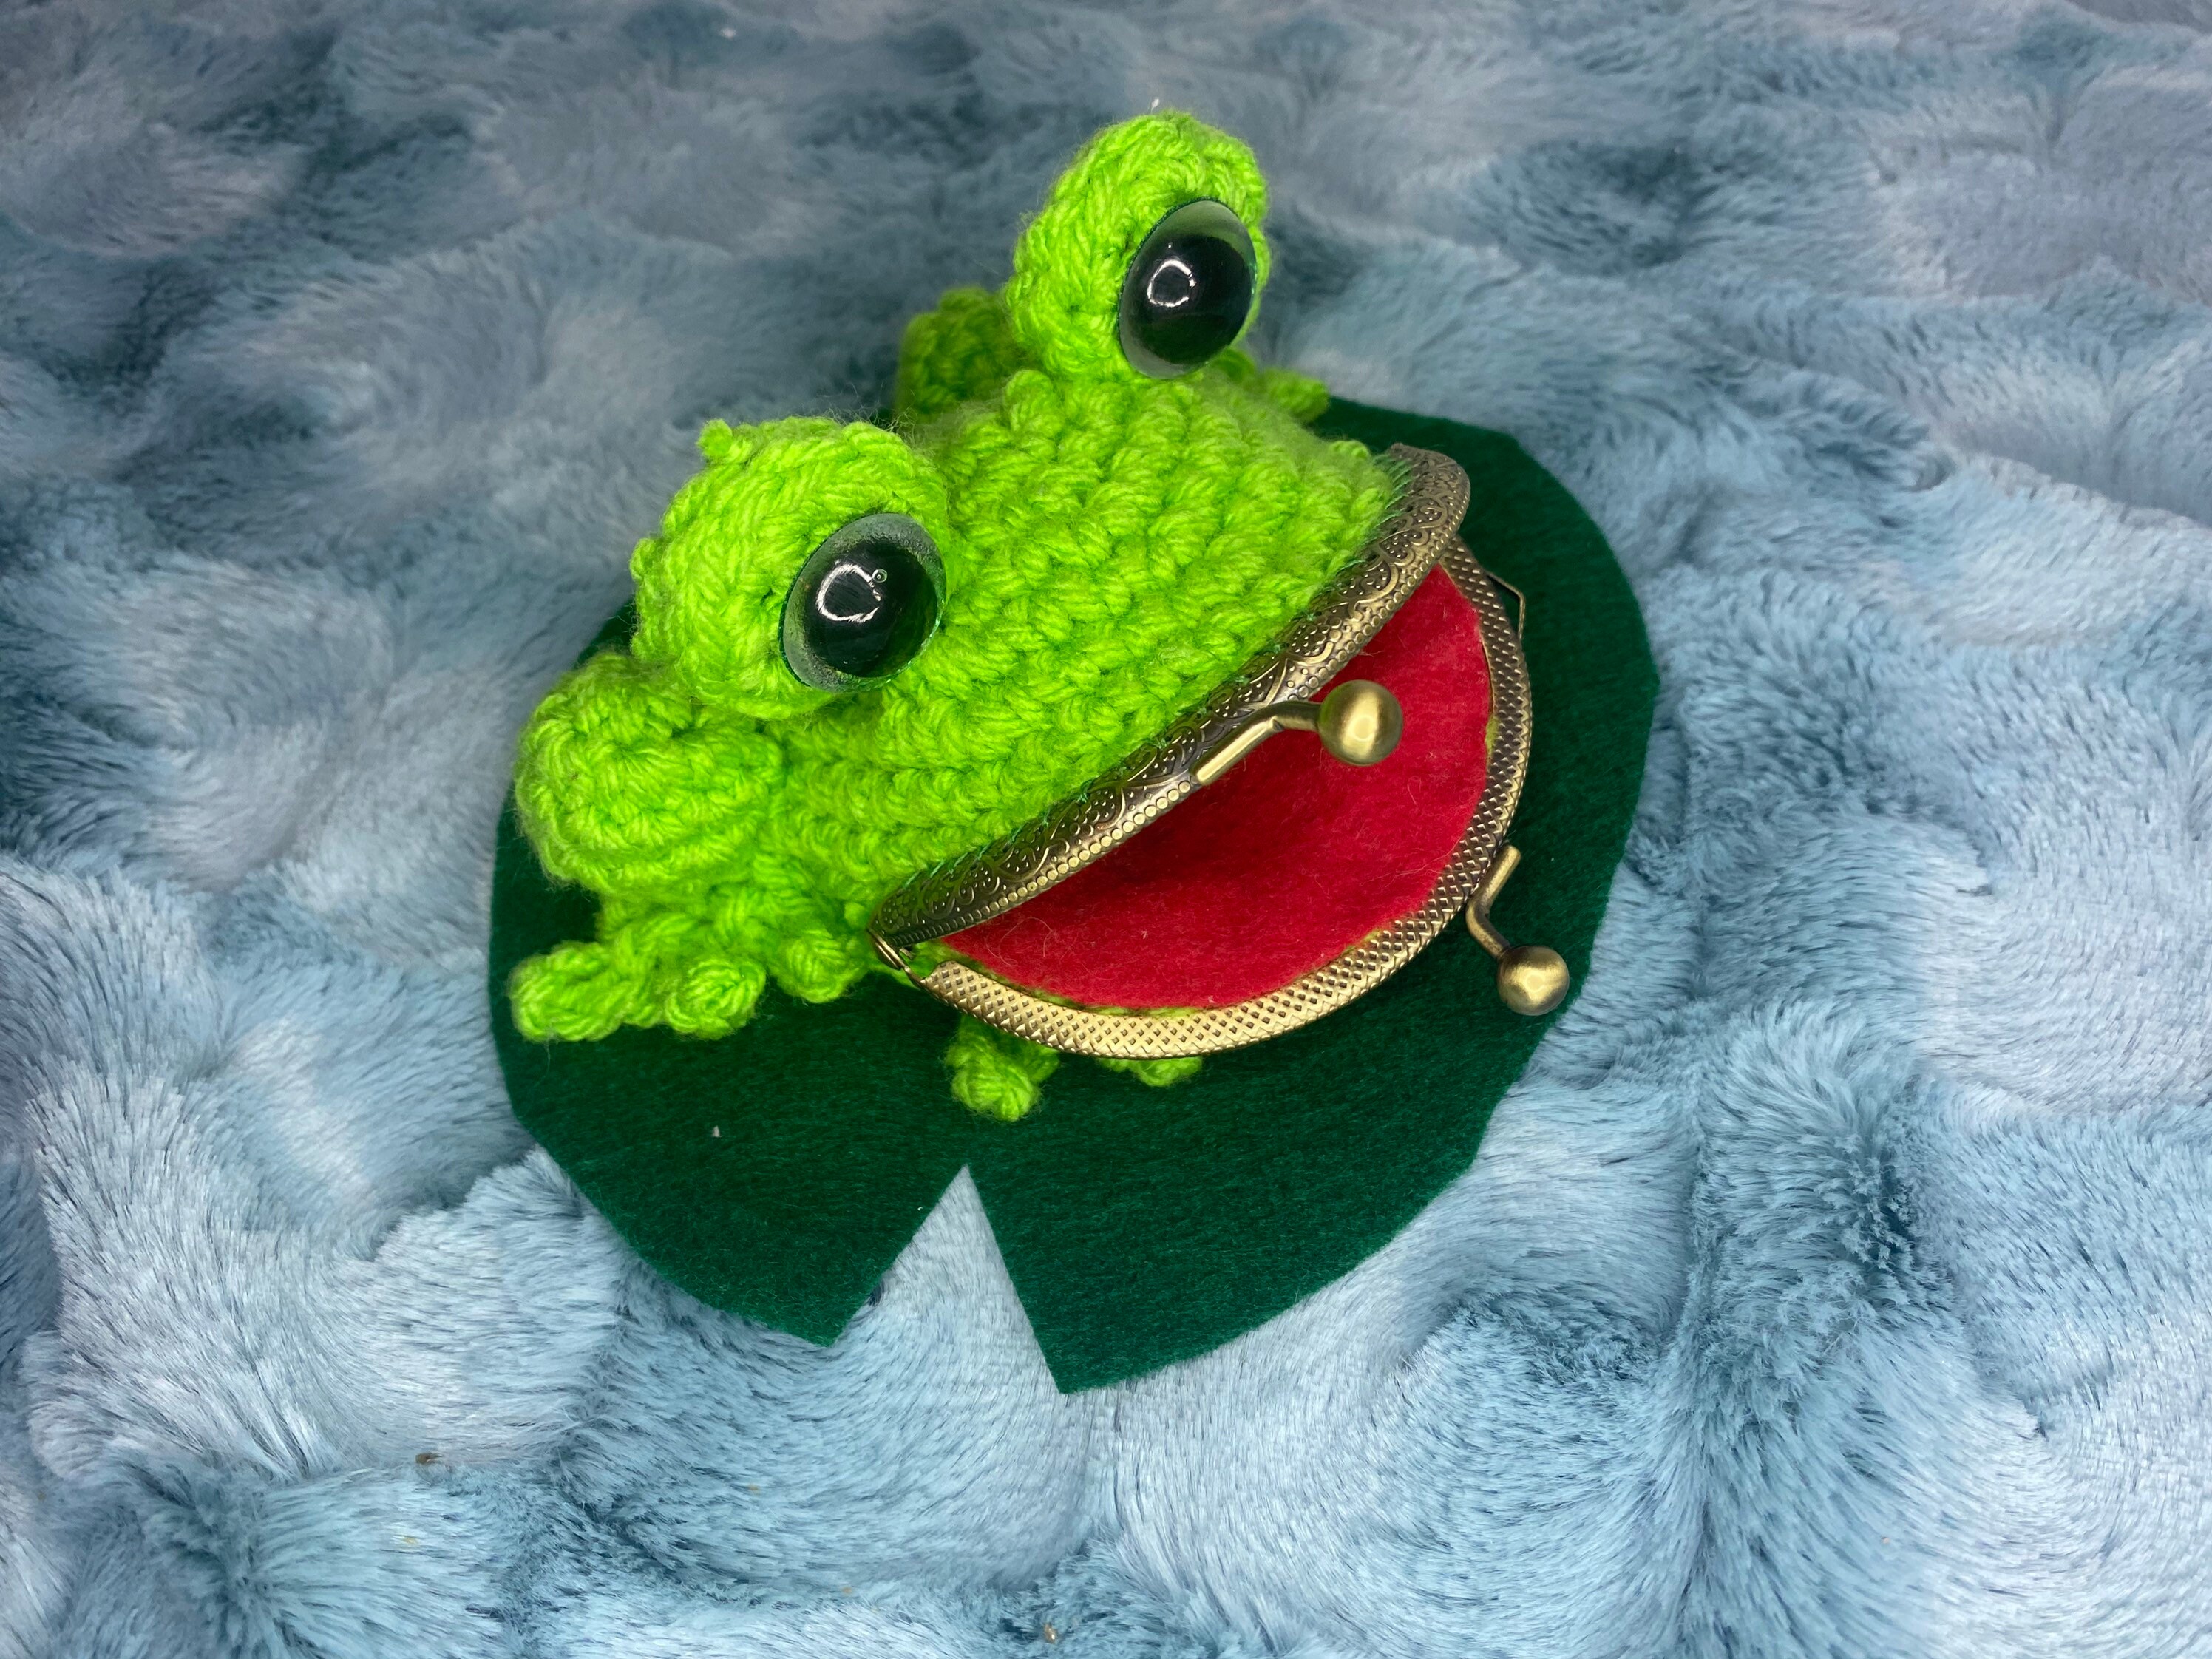 Inevnen Anime Frog Wallet ,Frog Coin Wallets Frog Coin Purse for Halloween  Cosplay Ninja Themed Party Gift - Walmart.com